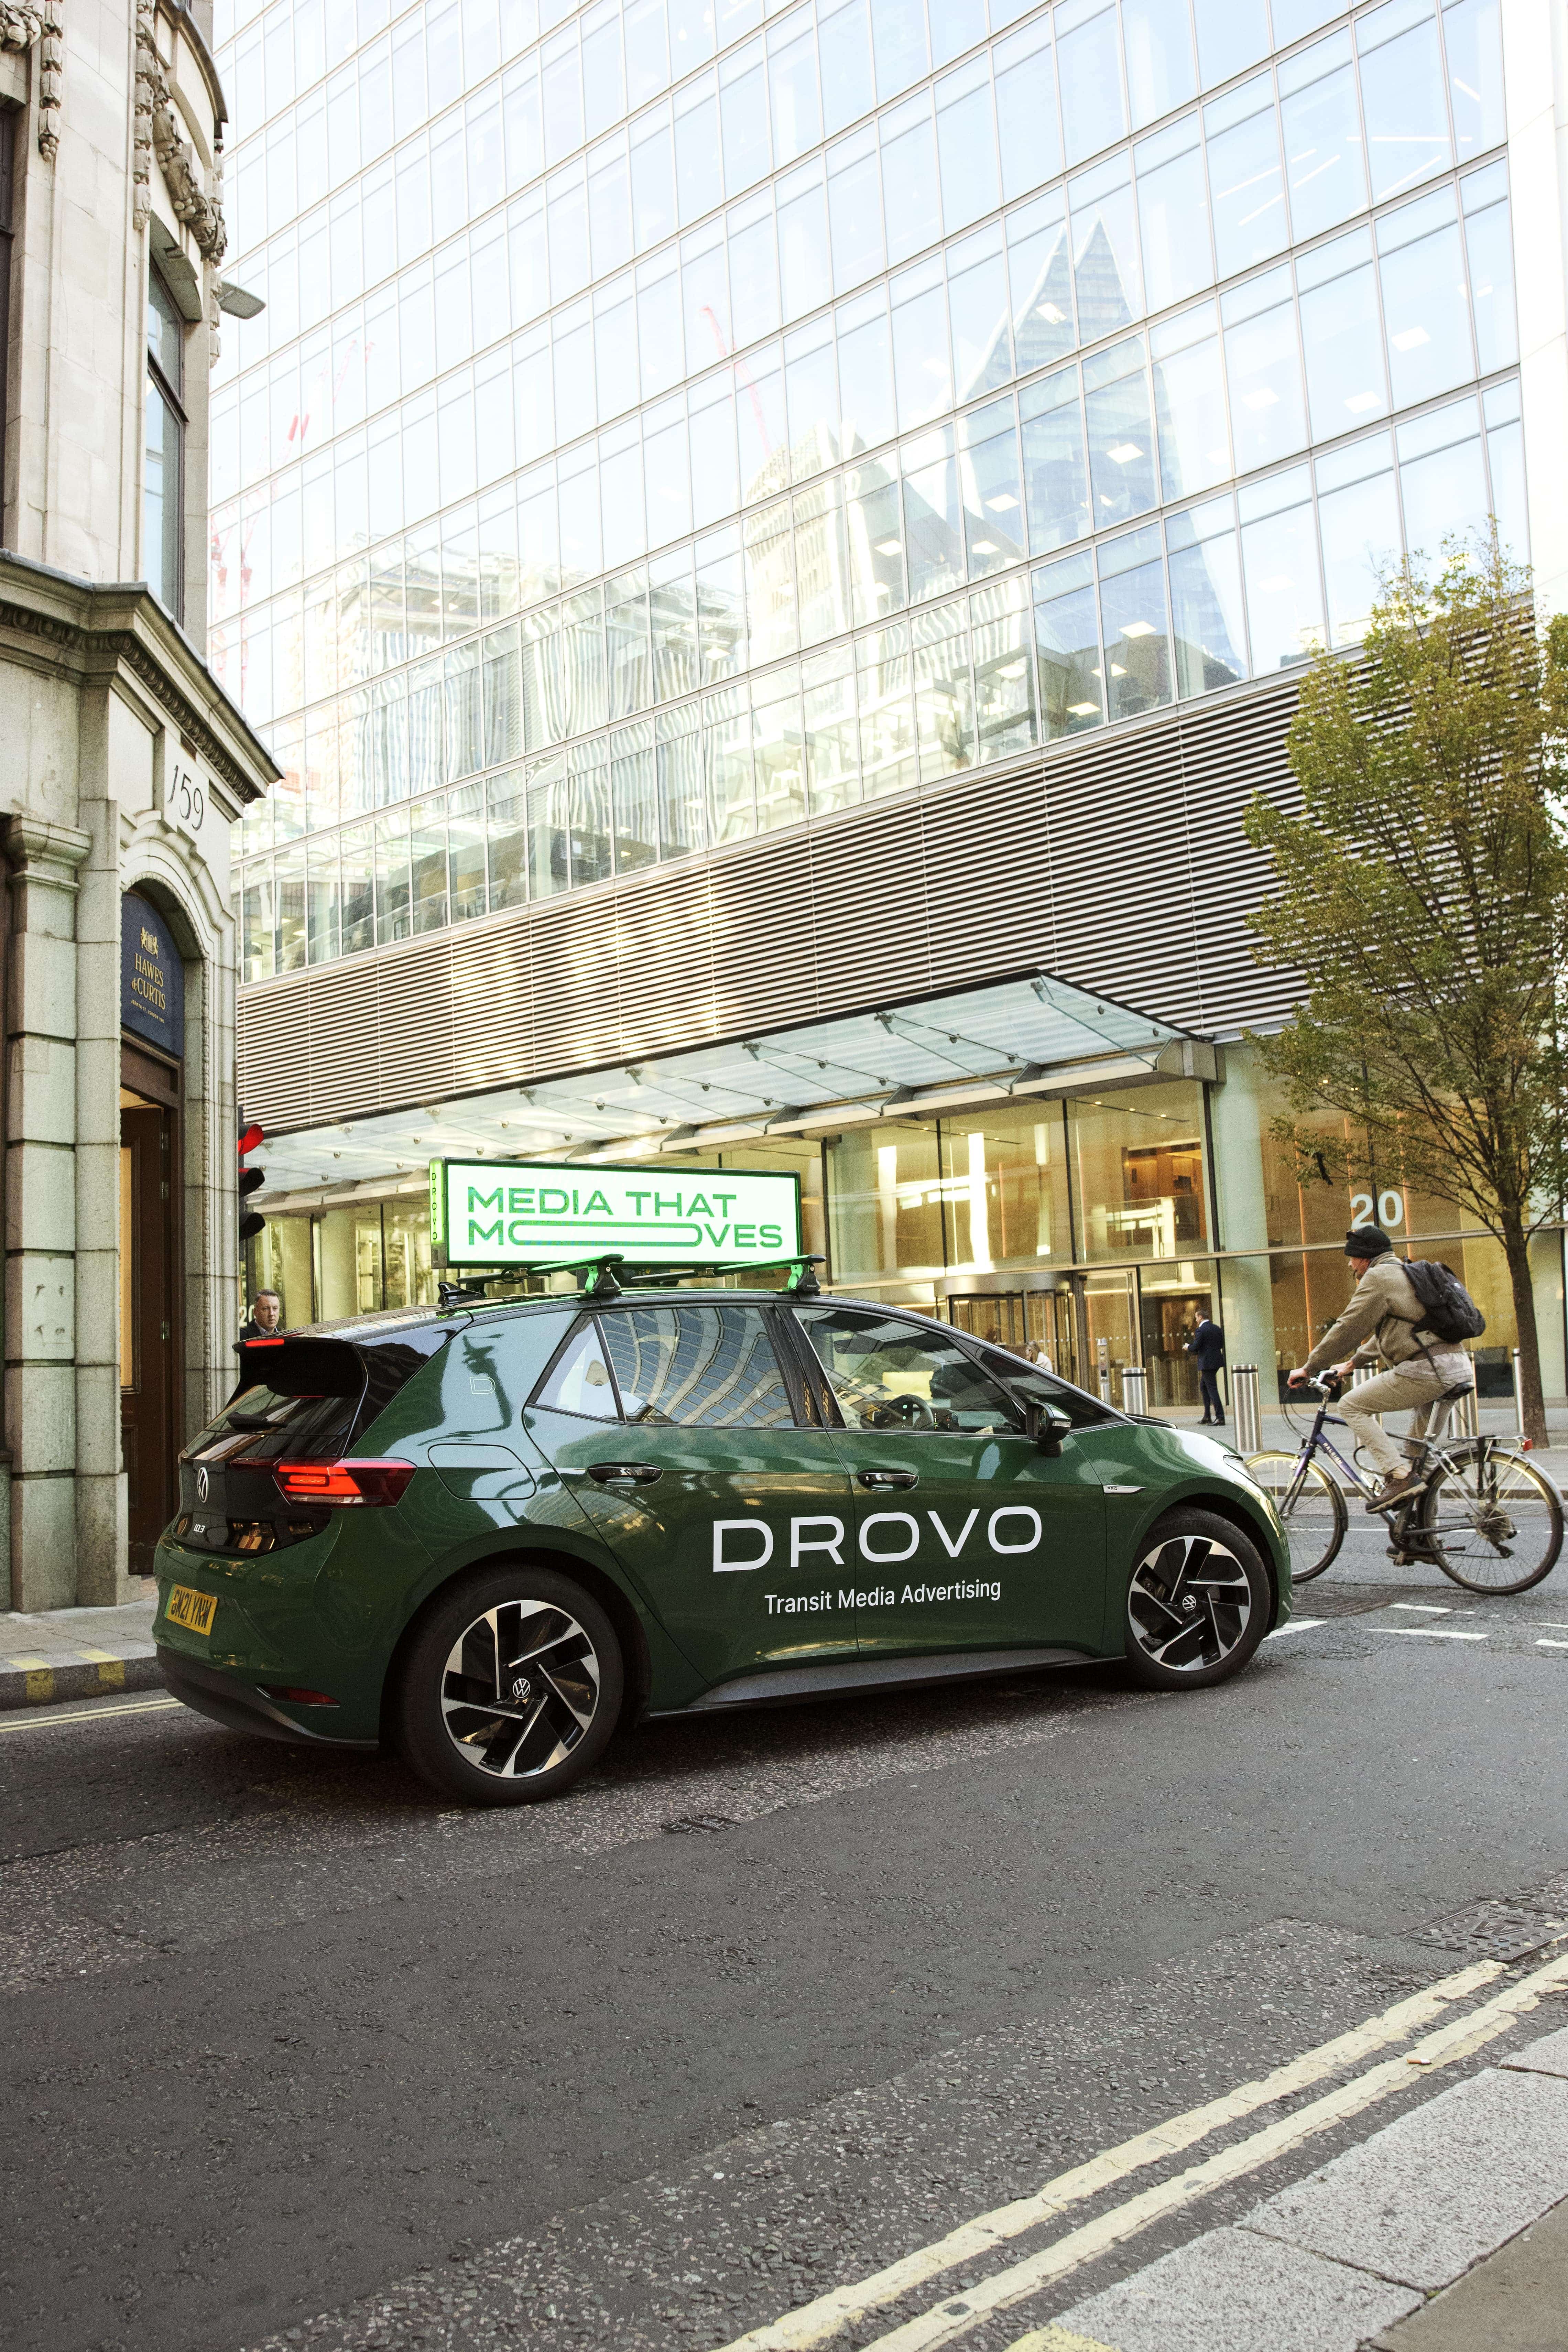 Drovo raises £3m to revolutionise OOH advertising with  dynamic digital vehicle topper screens in London